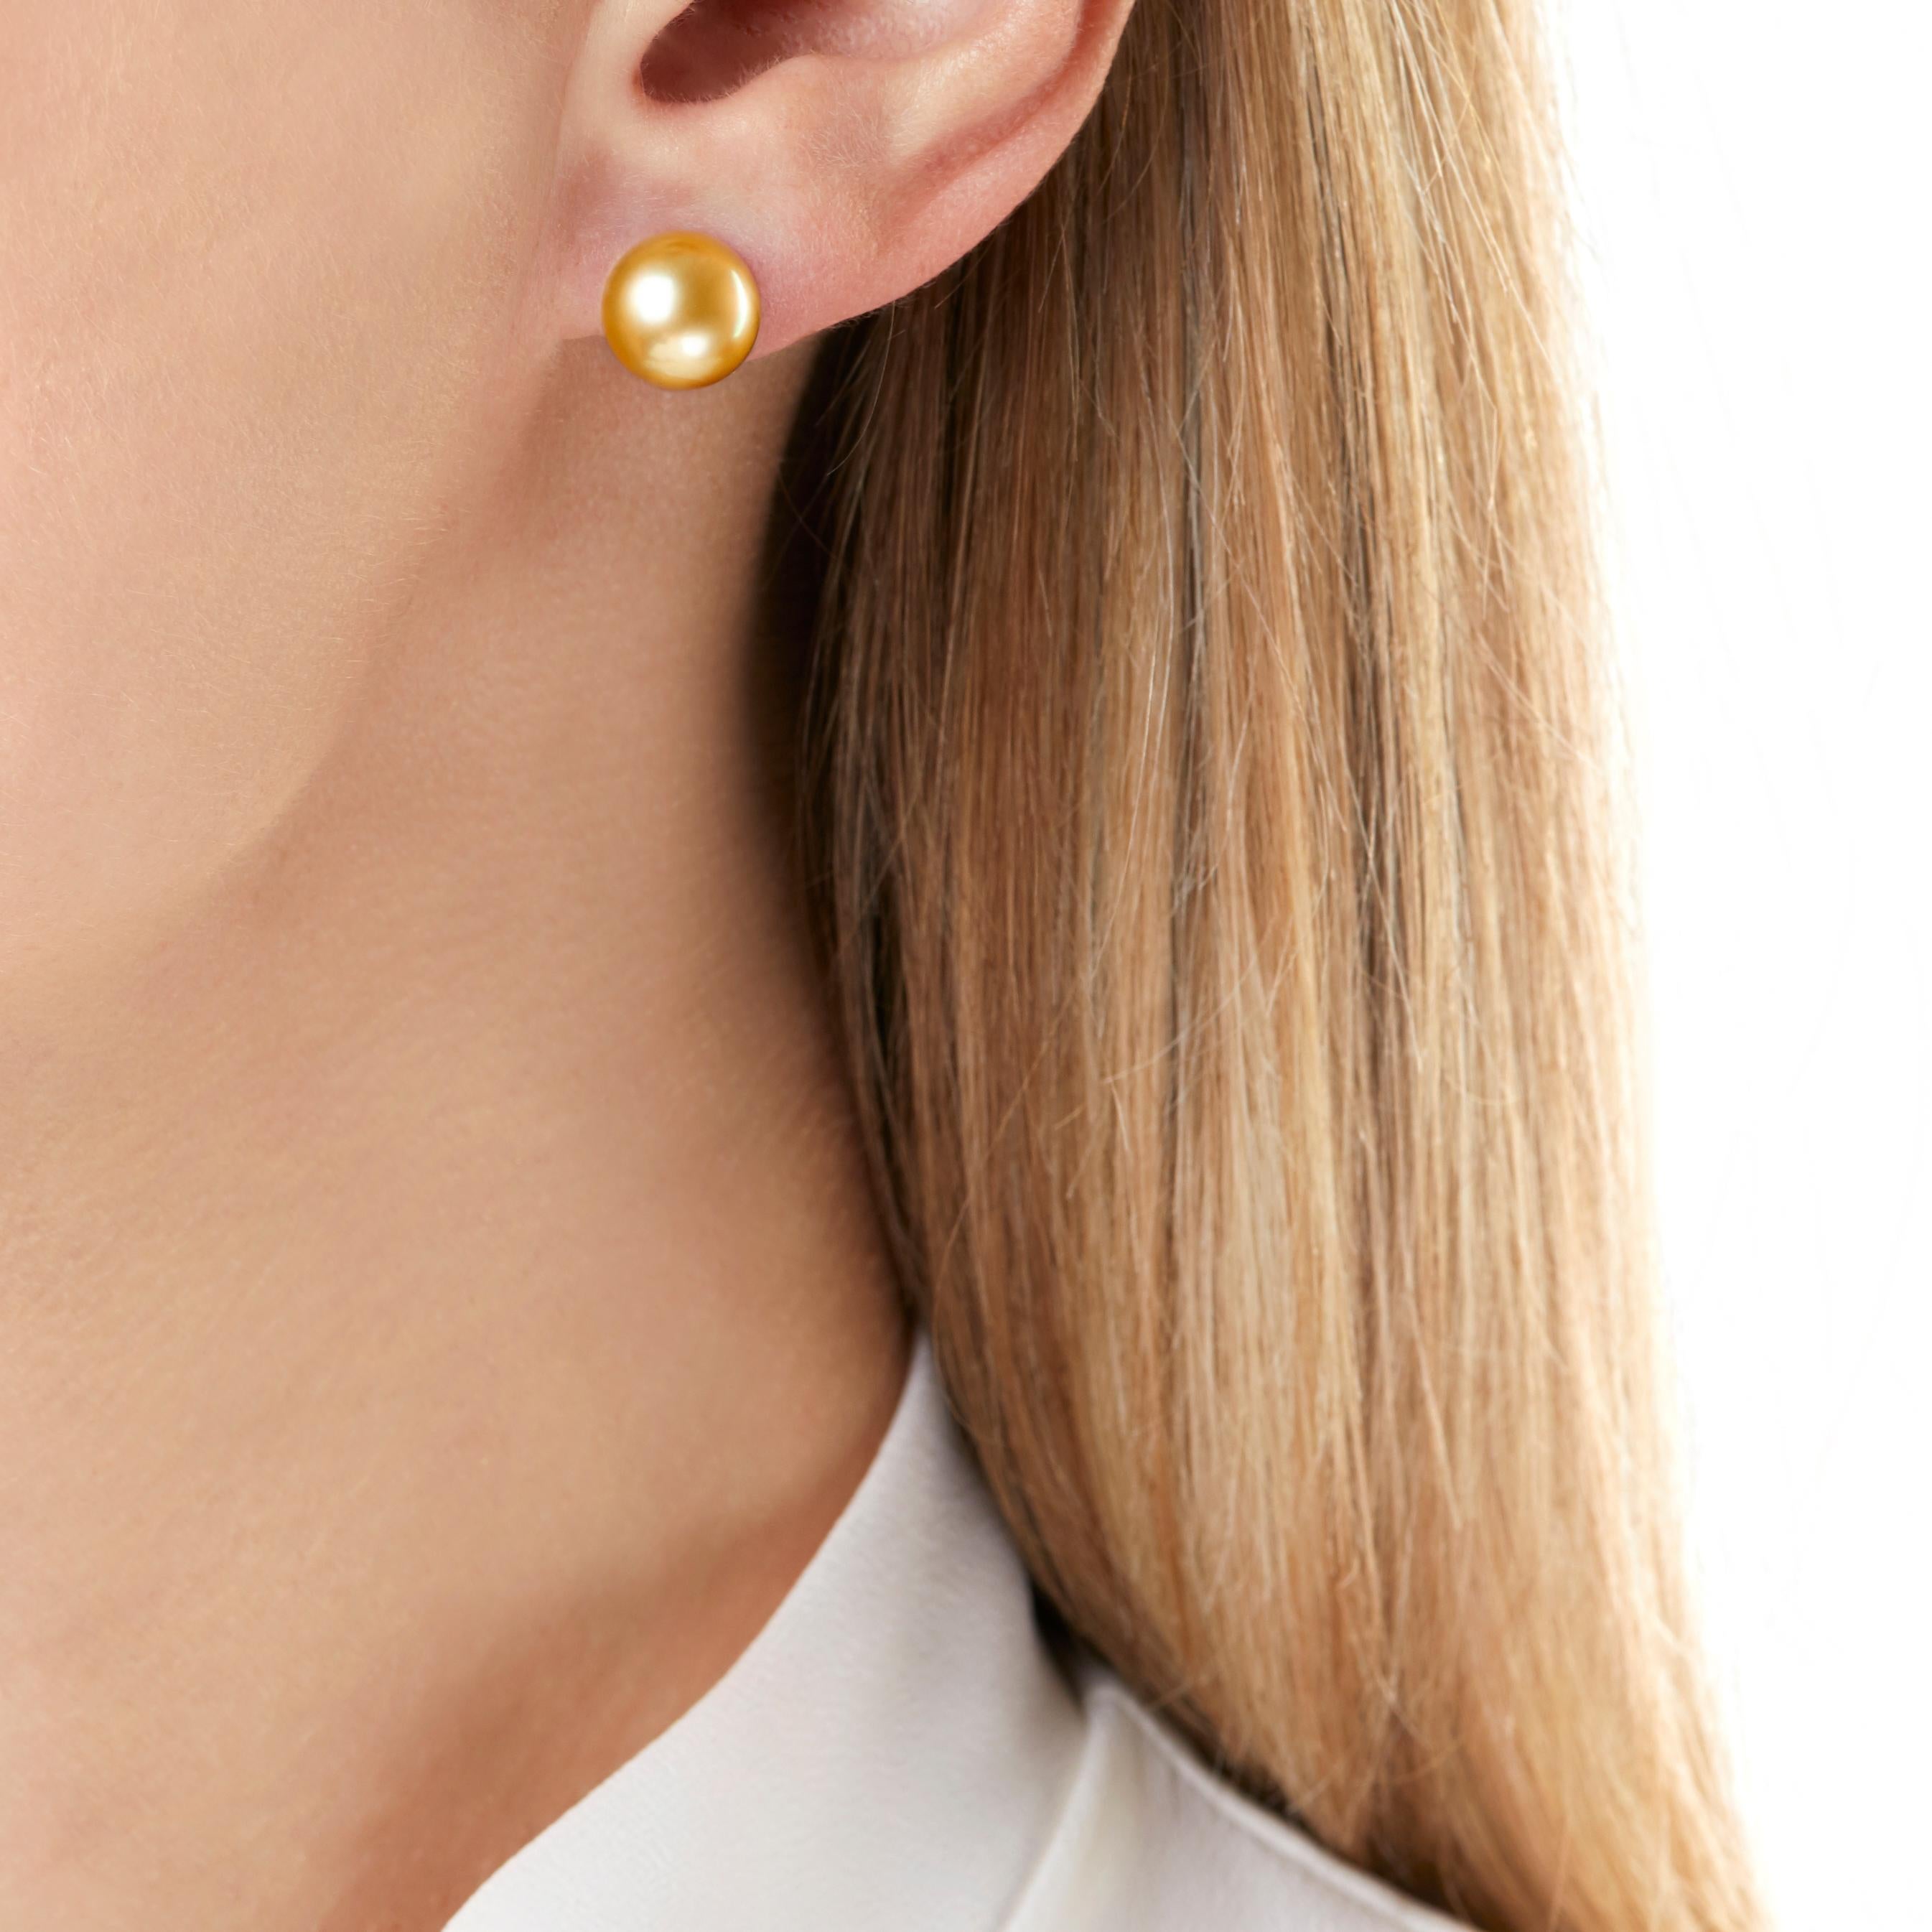 These elegant earrings by Yoko London feature rich Golden South Sea pearls on a classic 18K yellow gold post & scroll fitting. Offering a vibrant alternative to the timeless jewellery box essential, these earrings will add a touch of sophistication